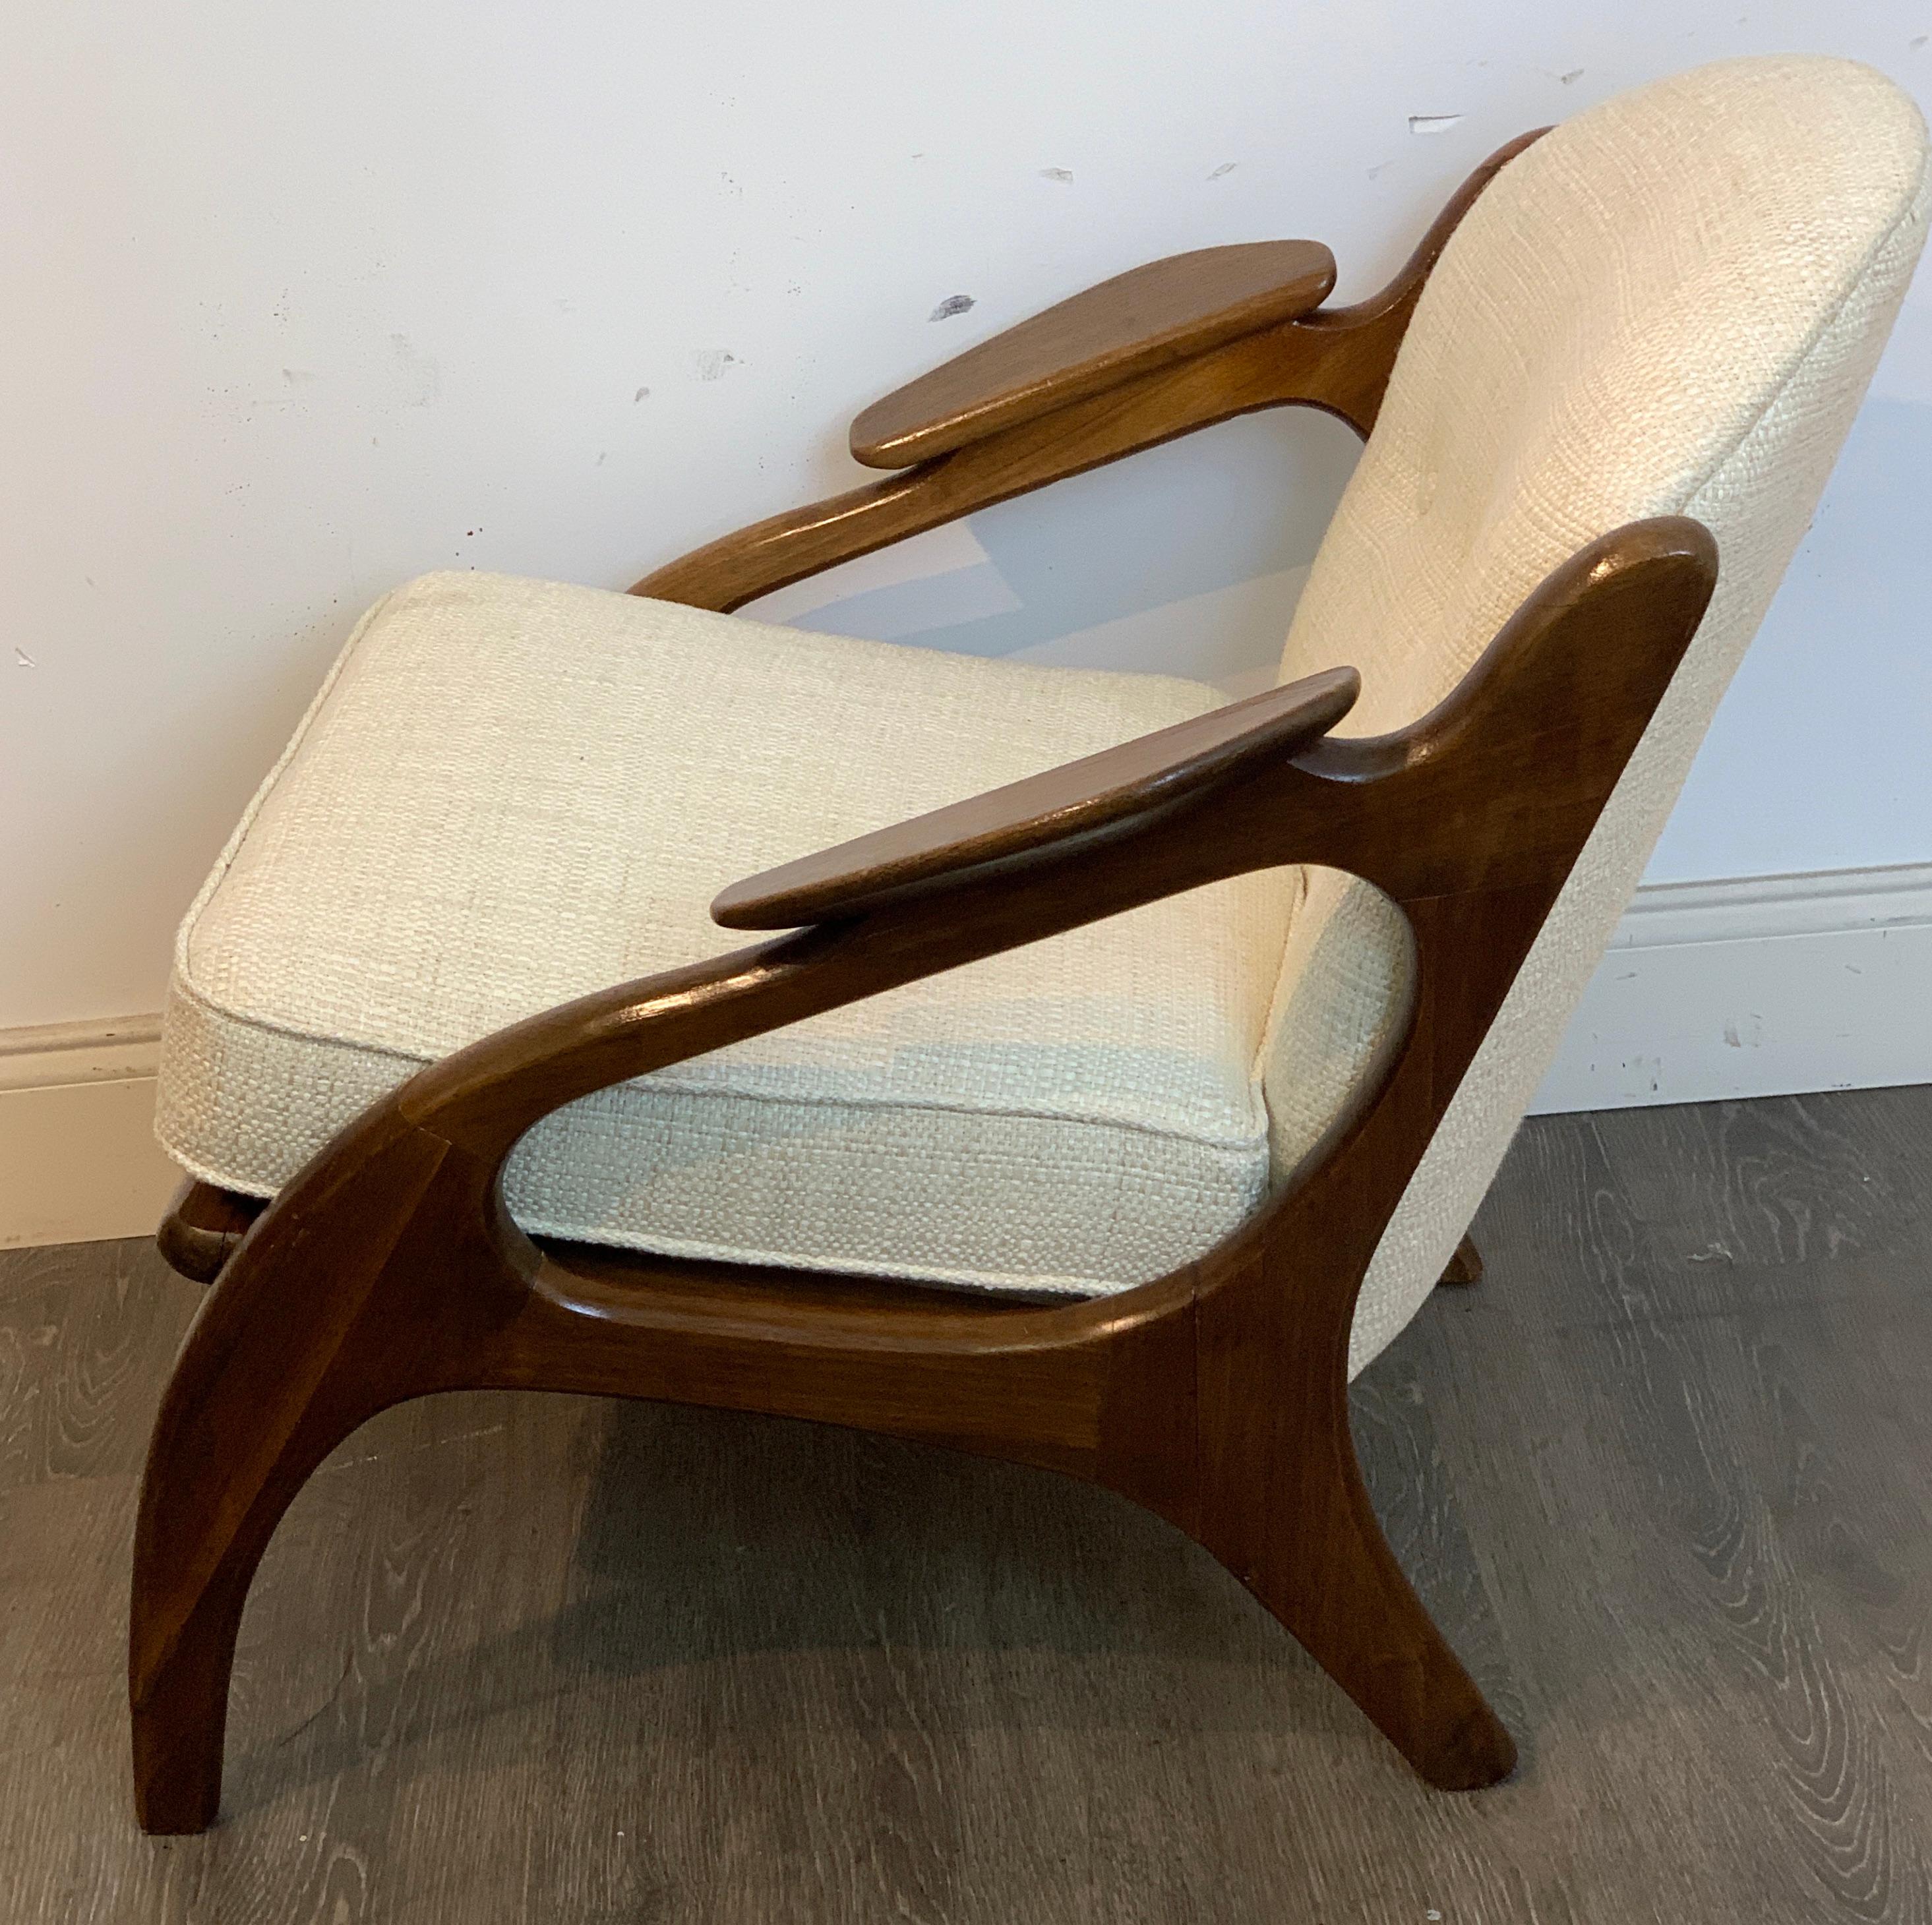 Upholstery Adrian Pearsall for Craft Associates Lounge Chair #2249-C, Restored